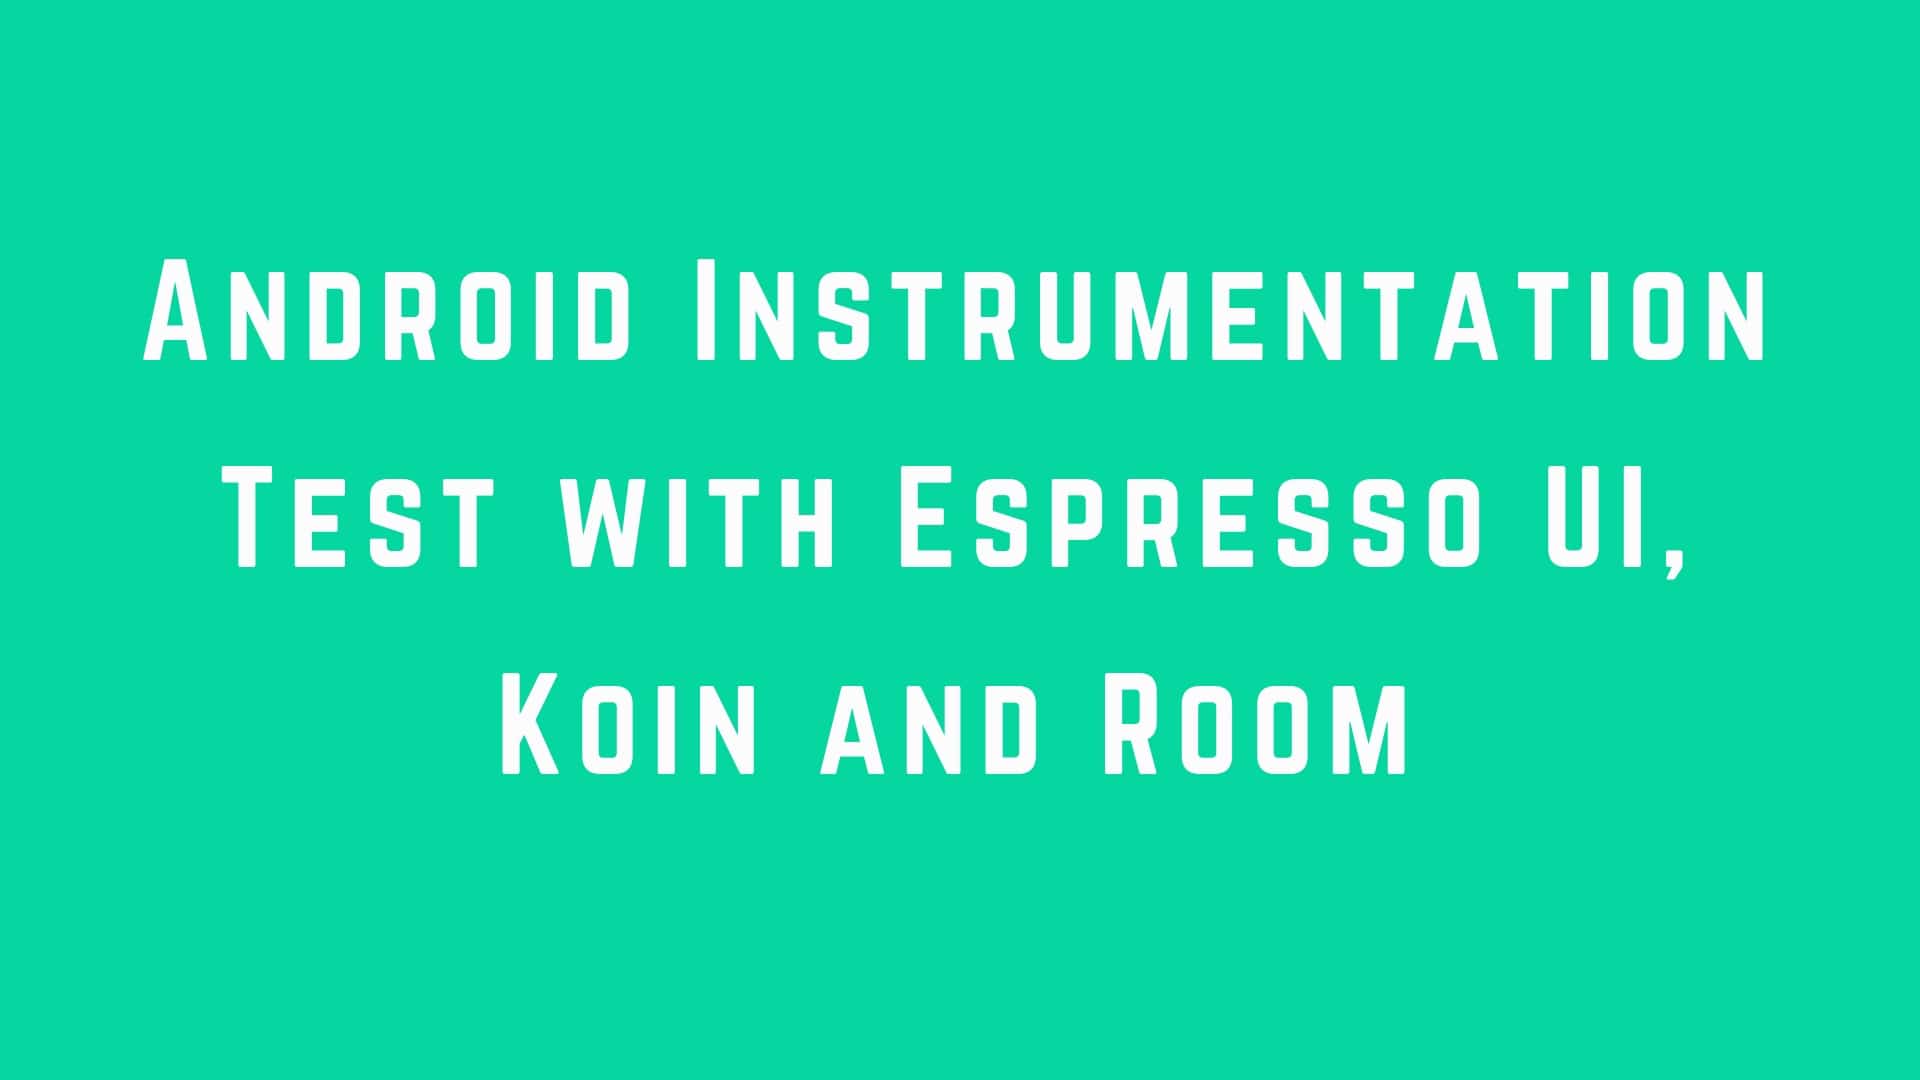 Android Instrumentation Test with Espresso UI, Koin and Room